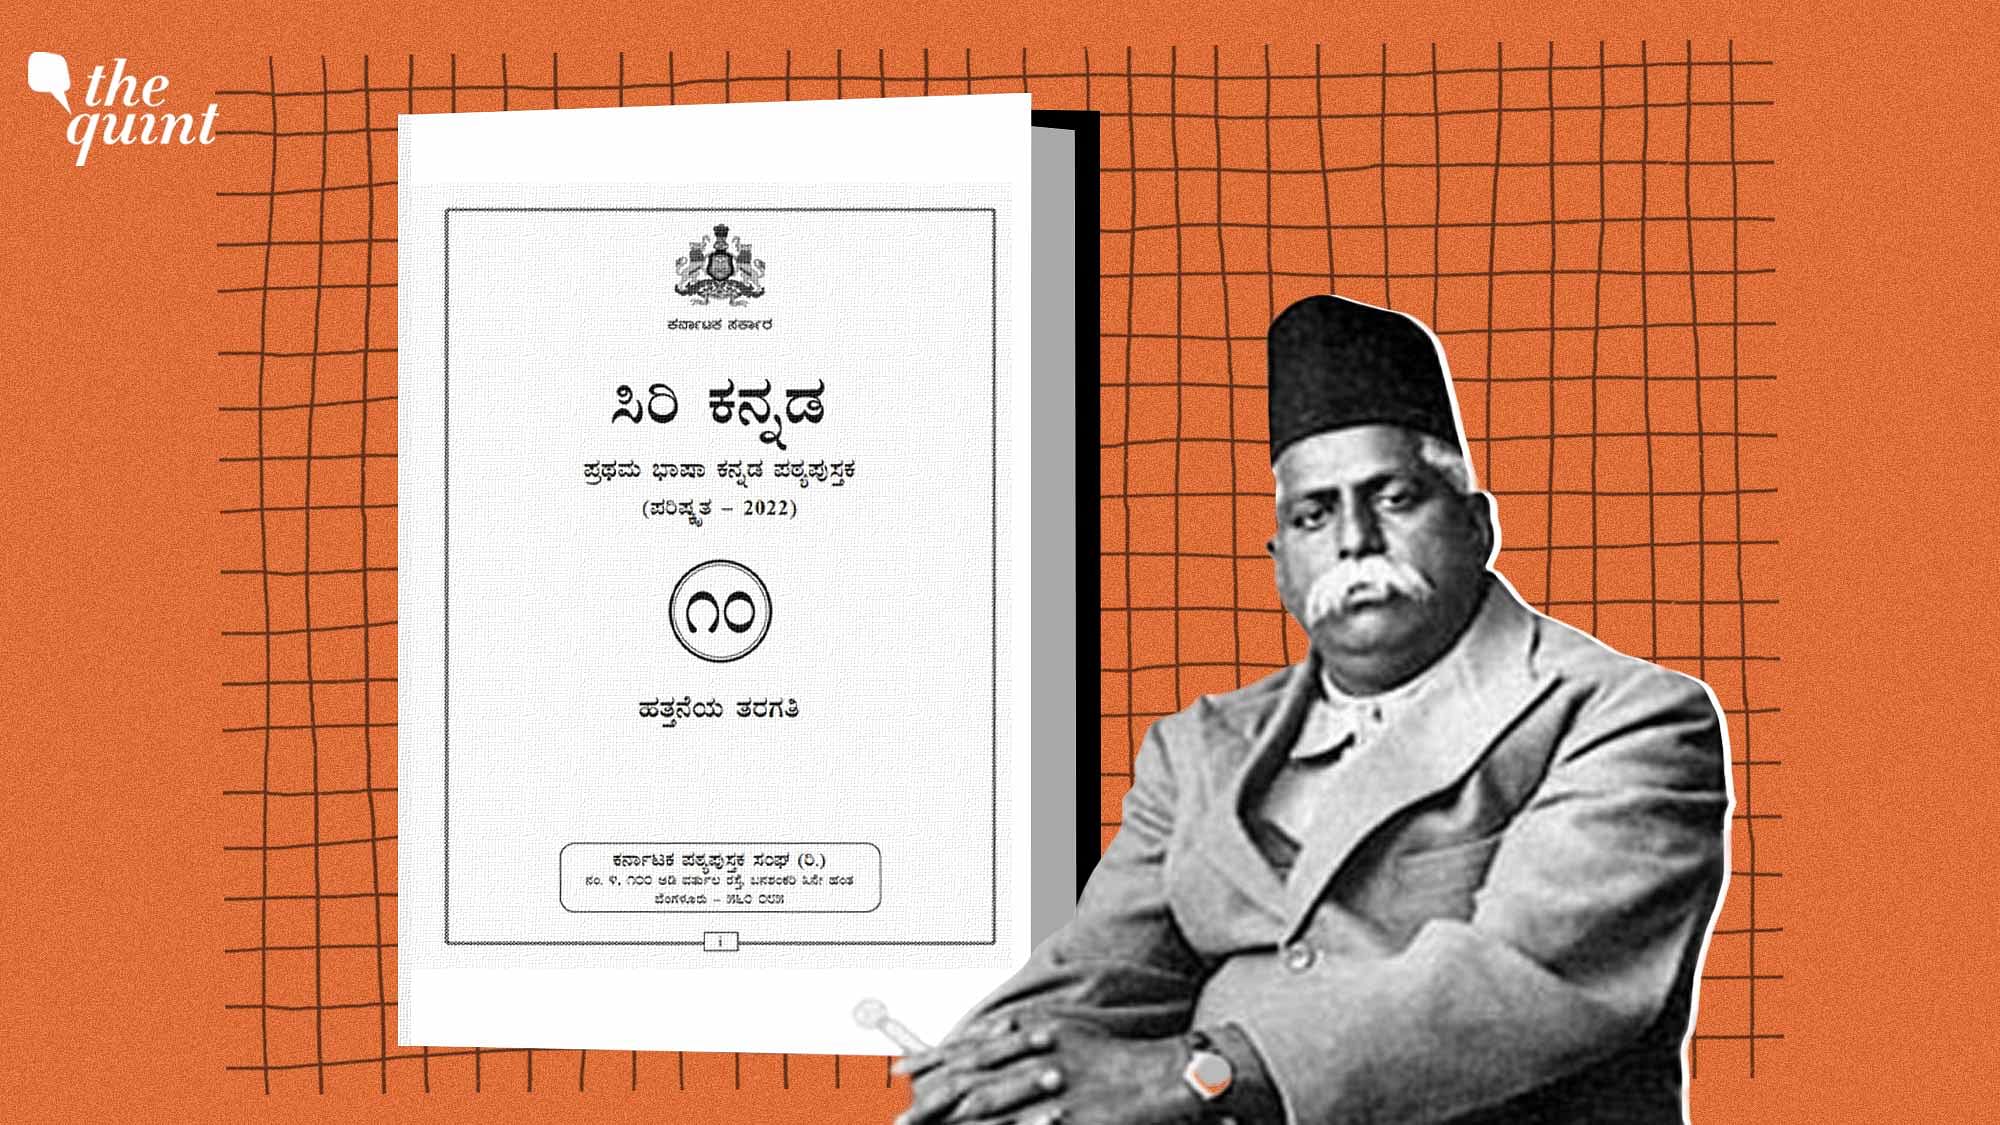 <div class="paragraphs"><p>Chapters on RSS founder Keshav Baliram Hedgewar is being added in Kannada textbooks, while texts of writers like P Lankesh, Sara Abubakar, and others have been dropped.</p></div>